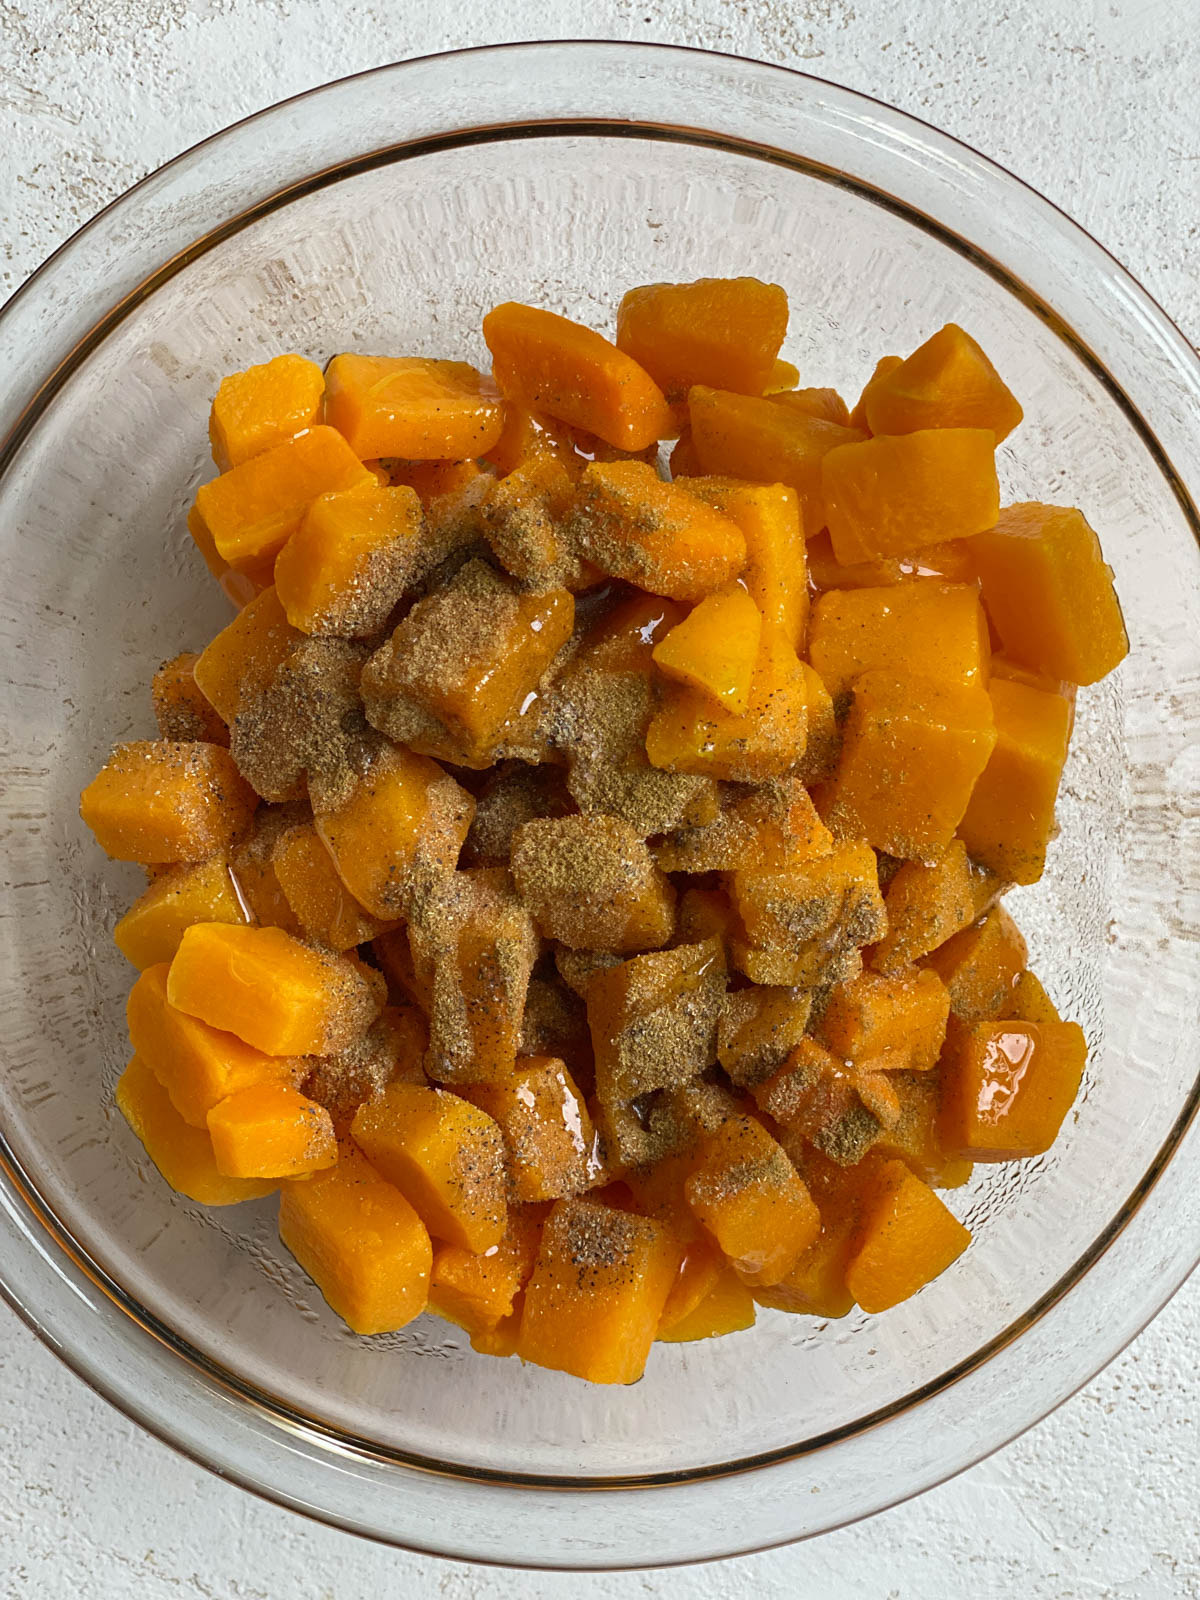 butternut squash and spice in a clear bowl against a white background